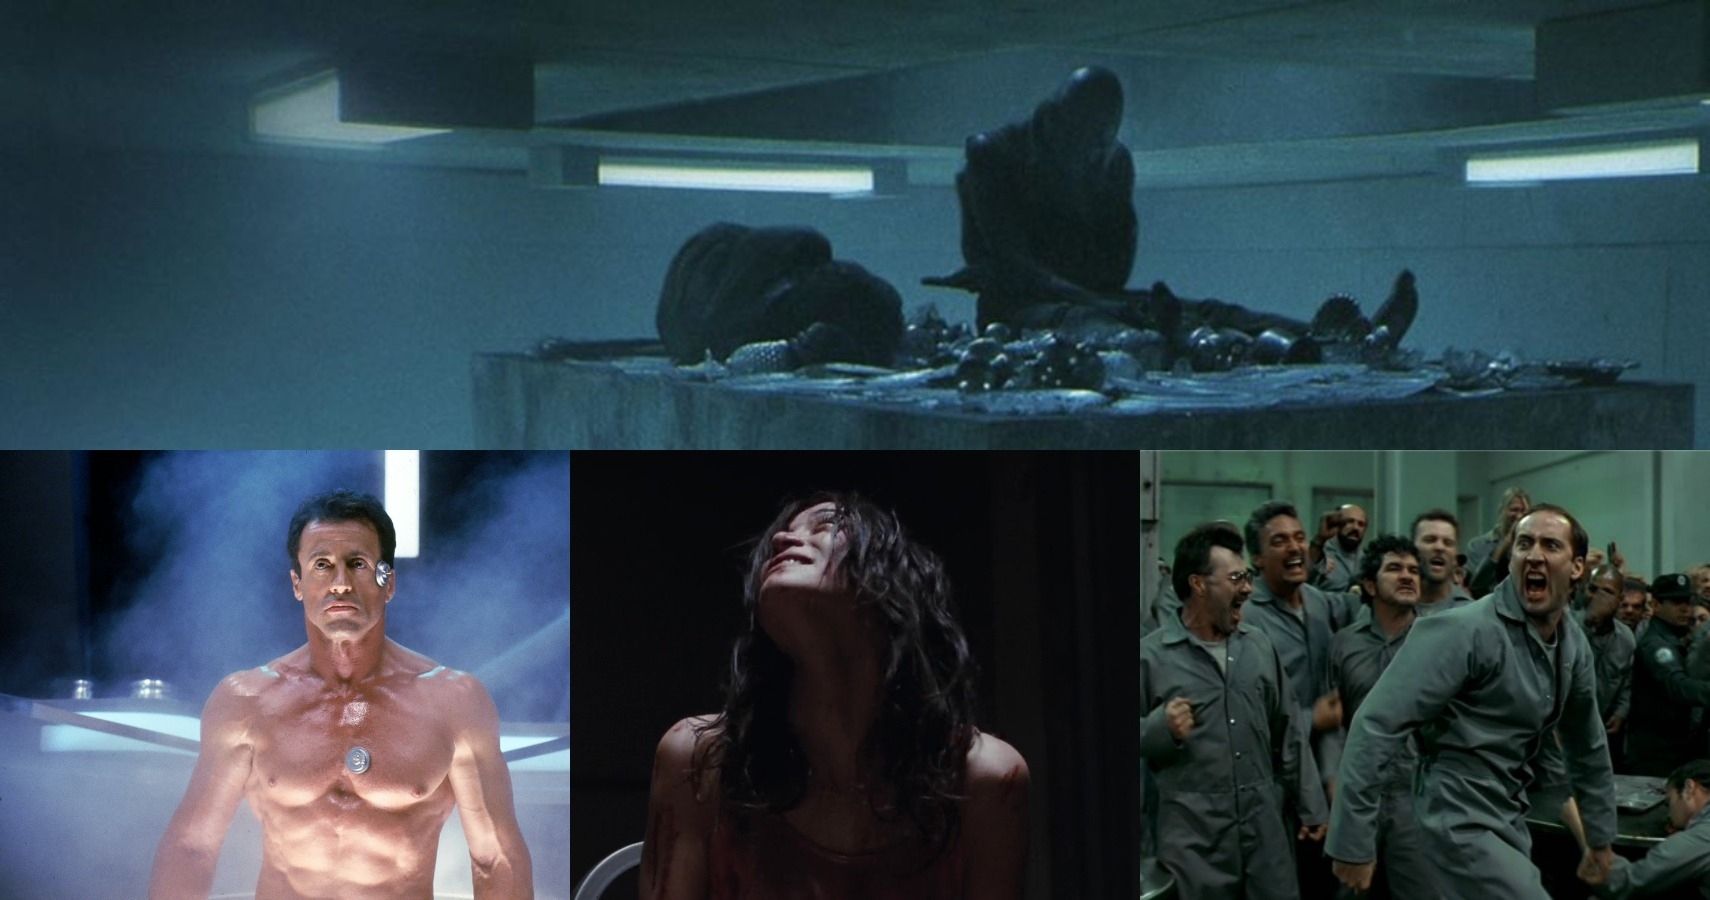 The Platform The 10 Worst Movie Prisons To Be Sent To